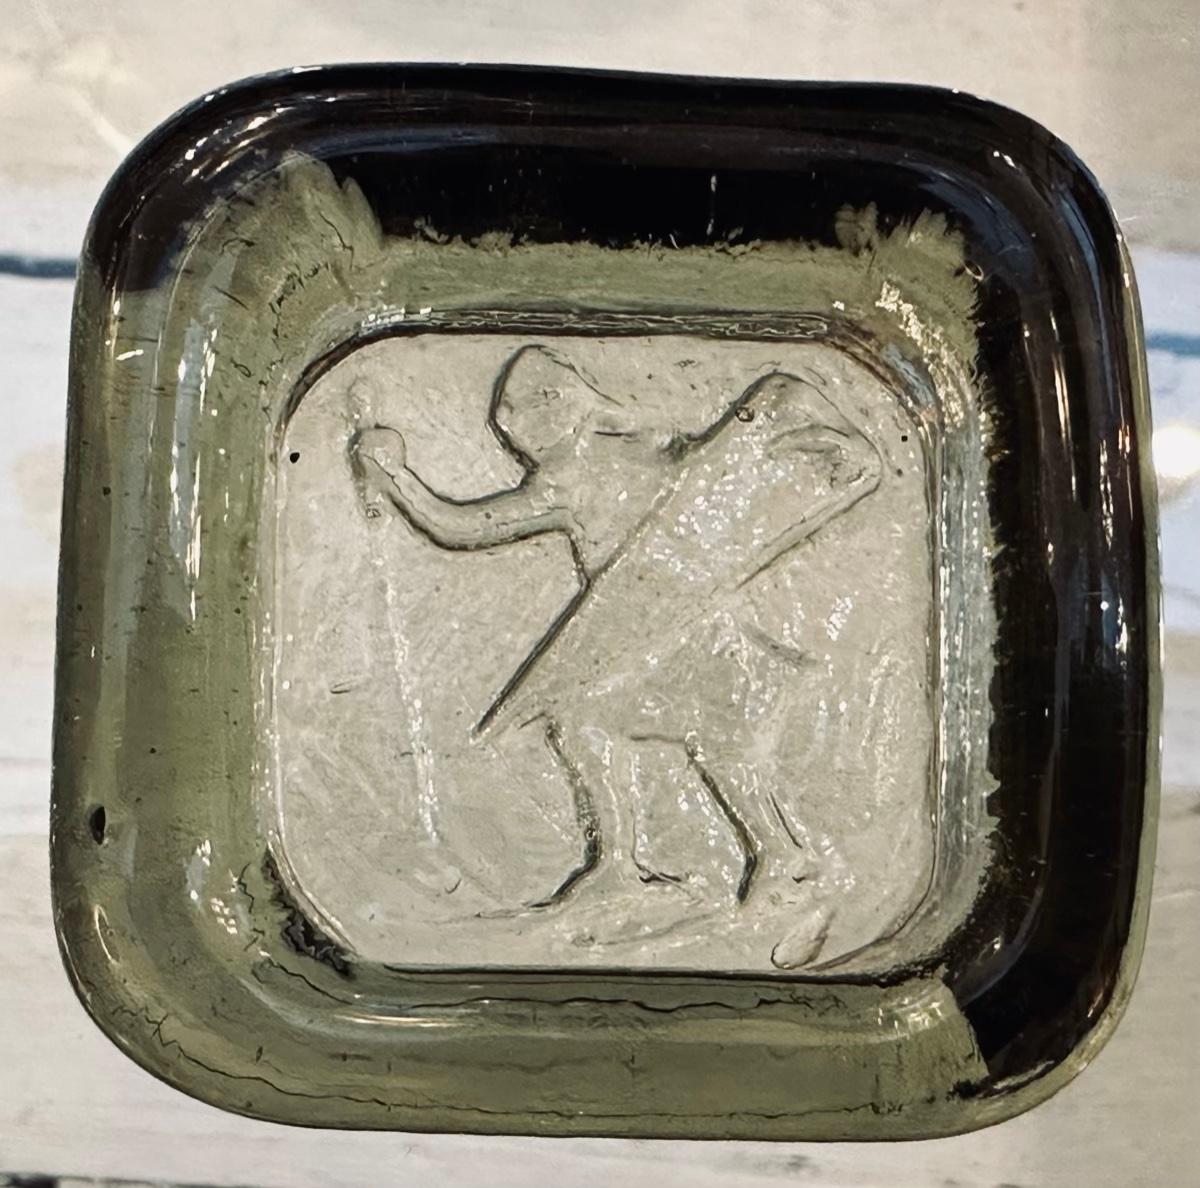 1960s Small Swedish paperweight, ashtray or trinket dish which is made from a thick piece of square coloured light olive glass. The warrior with a sword & shield design is pressed into the base of the glass to form the indented dish shape. The dish